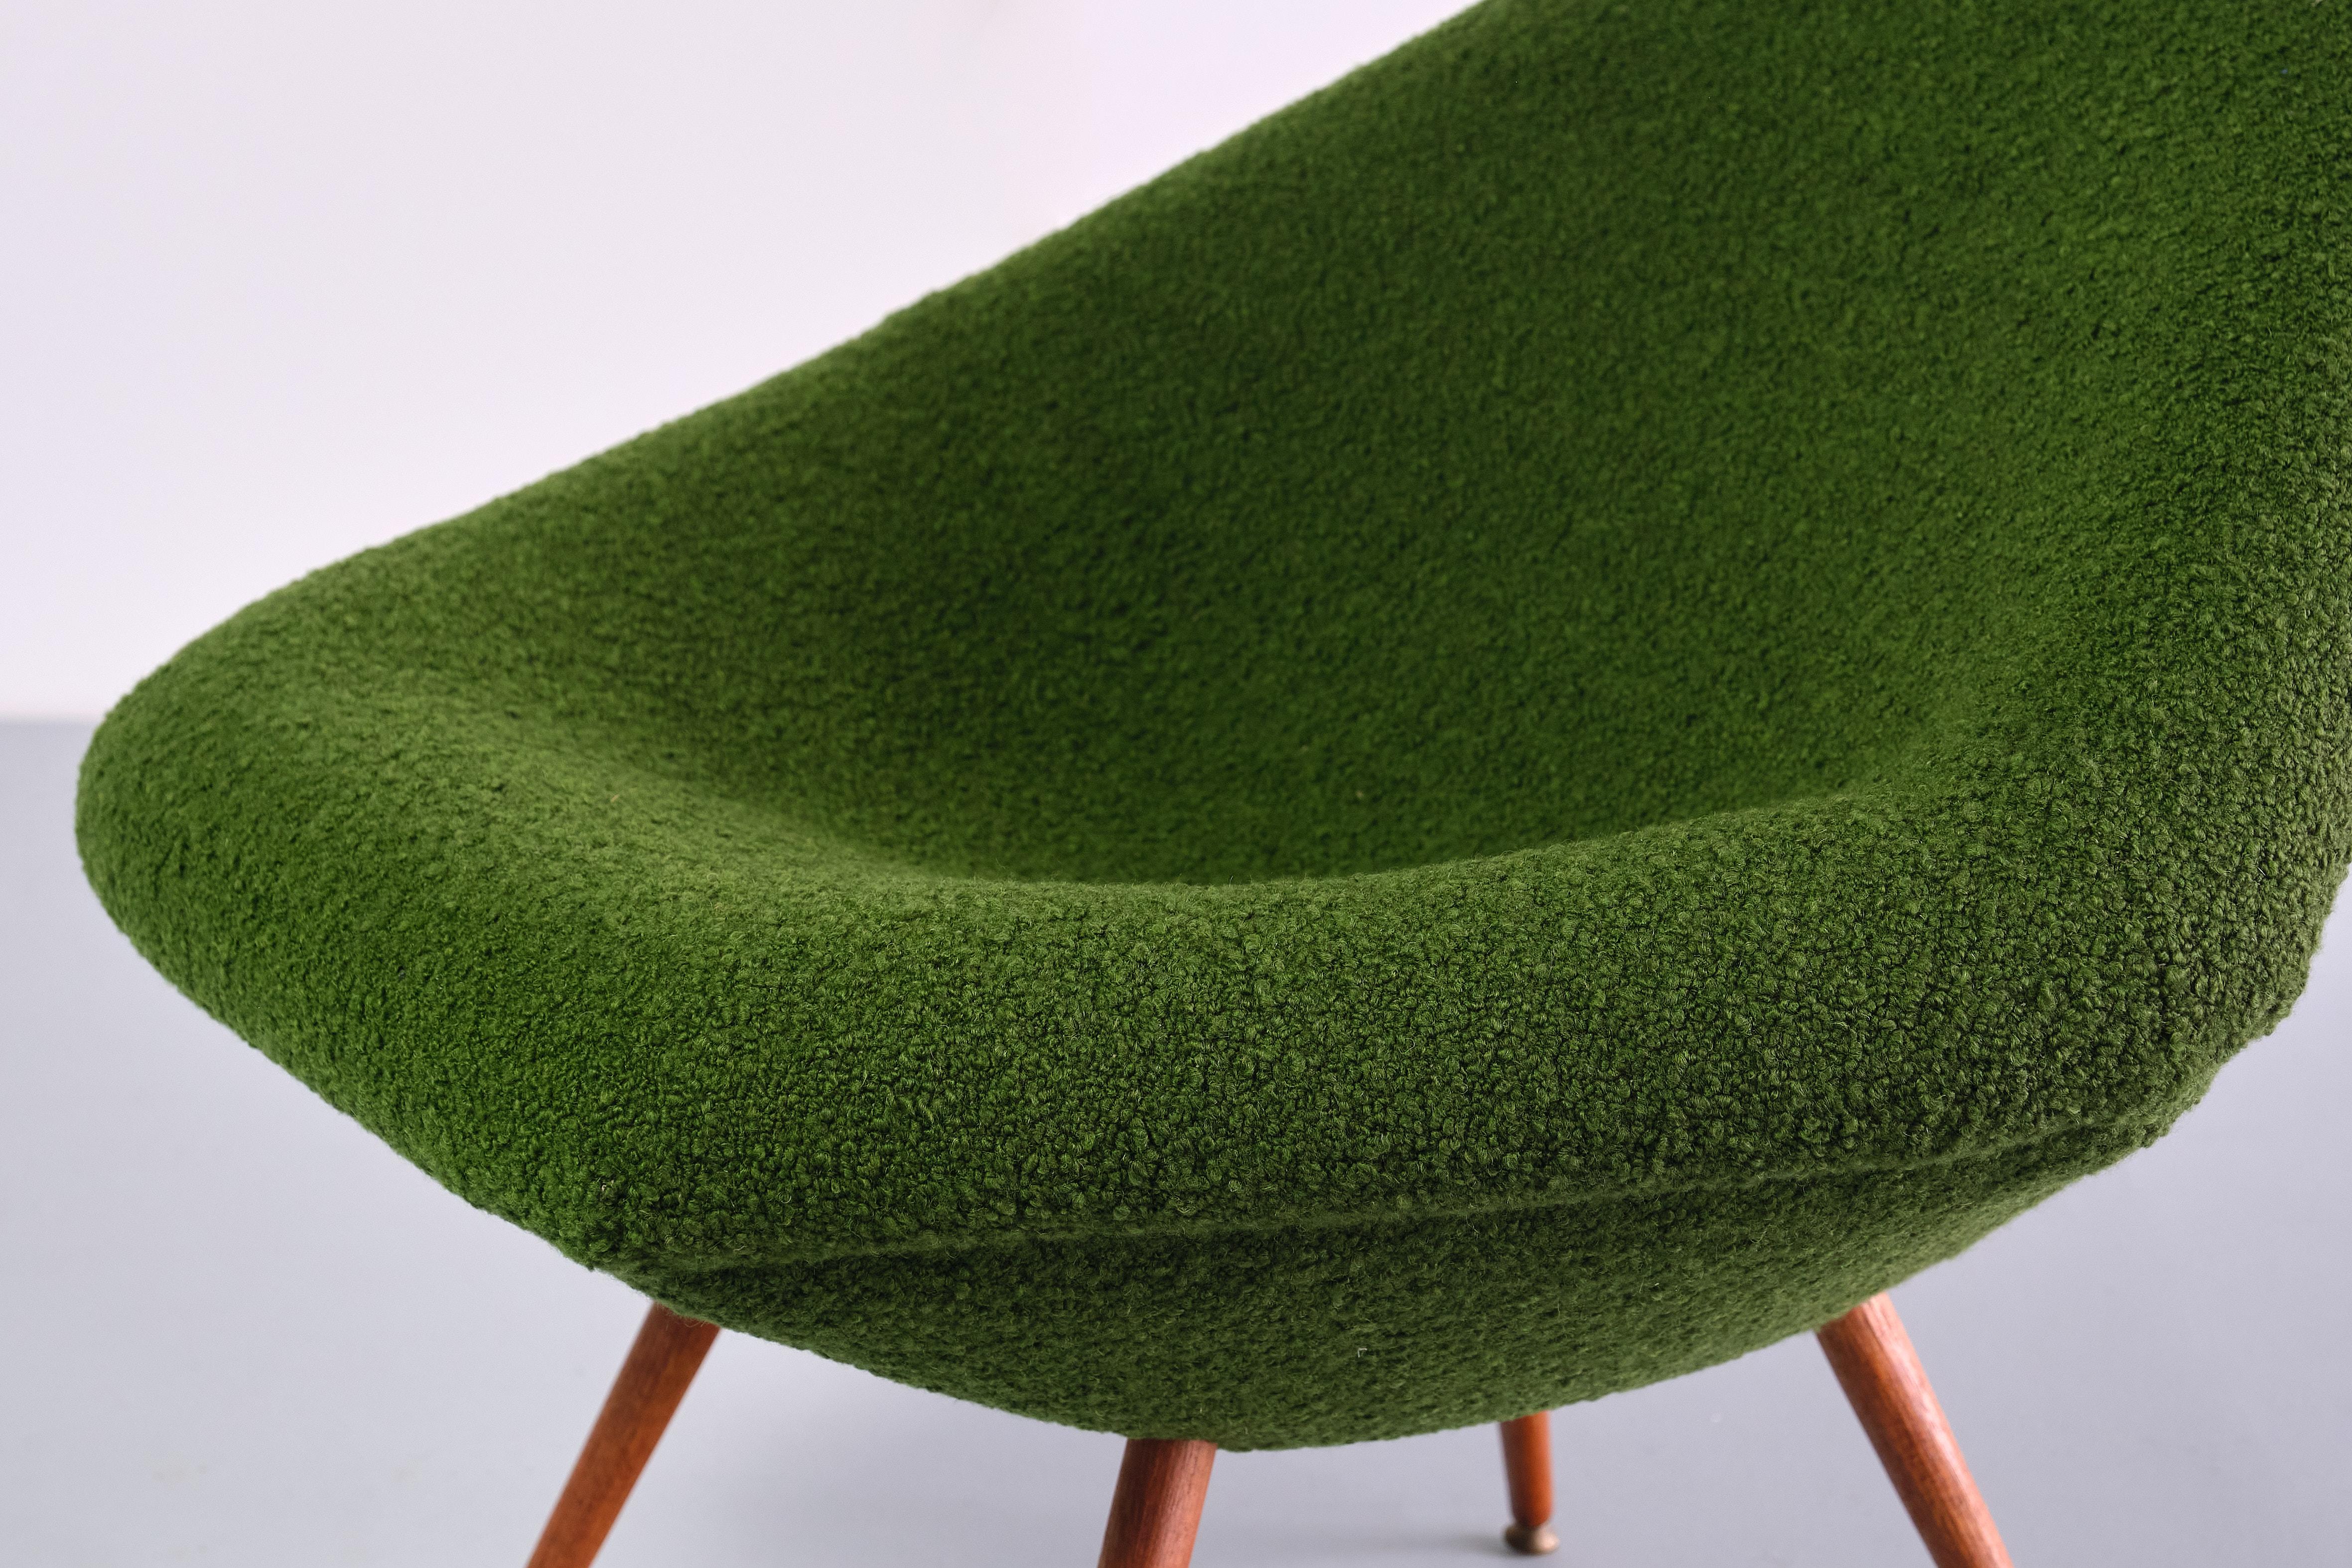 Pair of Arne Dahlén Lounge Chairs in Green Bouclé and Teak, Sweden, 1960s For Sale 5